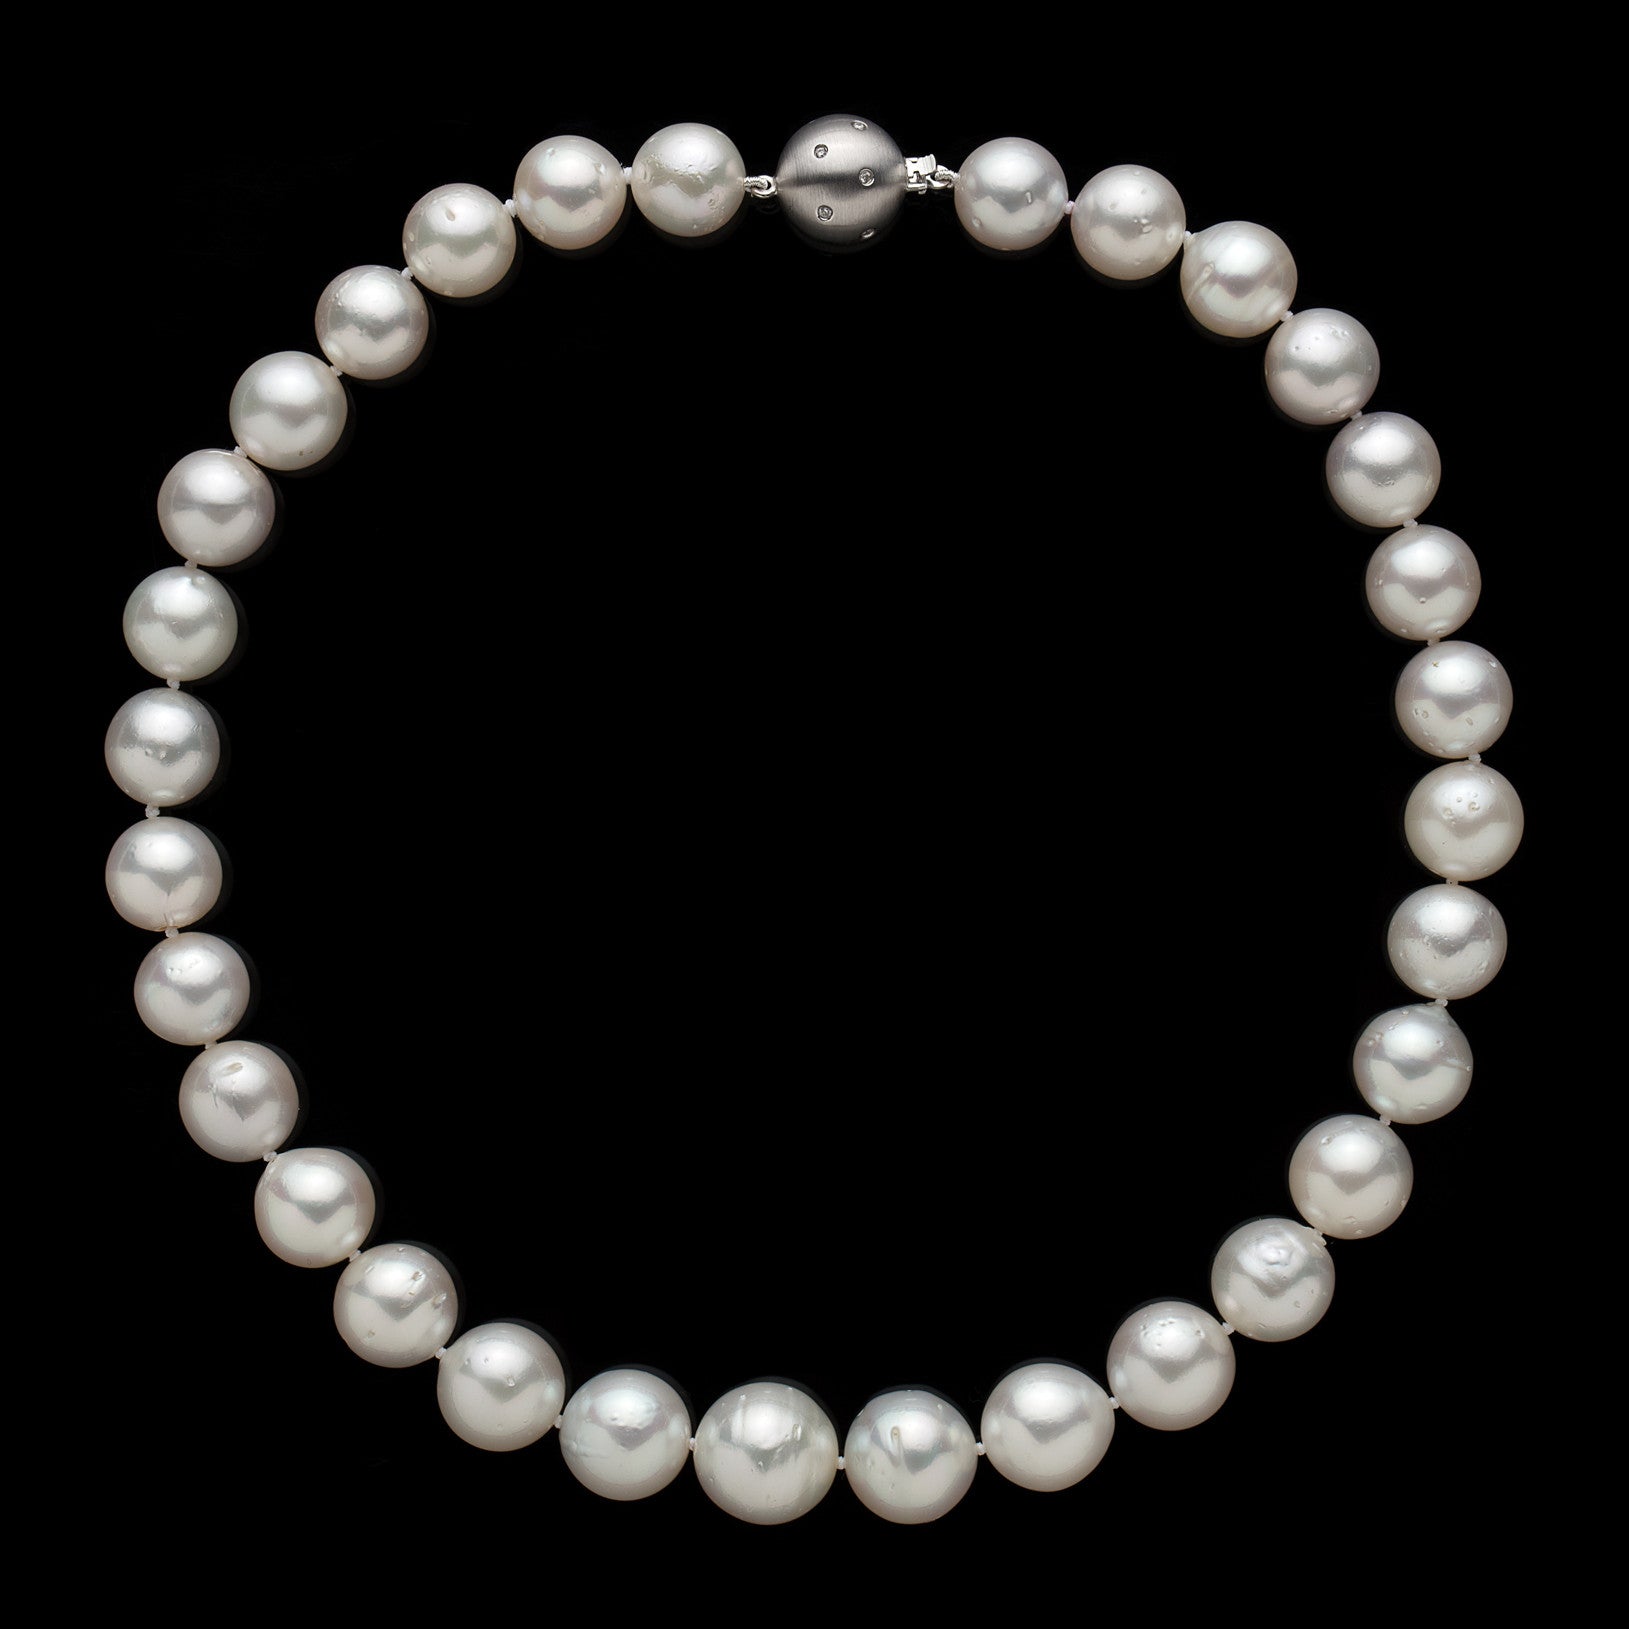 Coucoland 1920s Imitation Pearls Necklace 20s Gatsby Knot Pearl Necklace 1920s Flapper Pearls Accessories Two-Tone Stitching Style Black and White